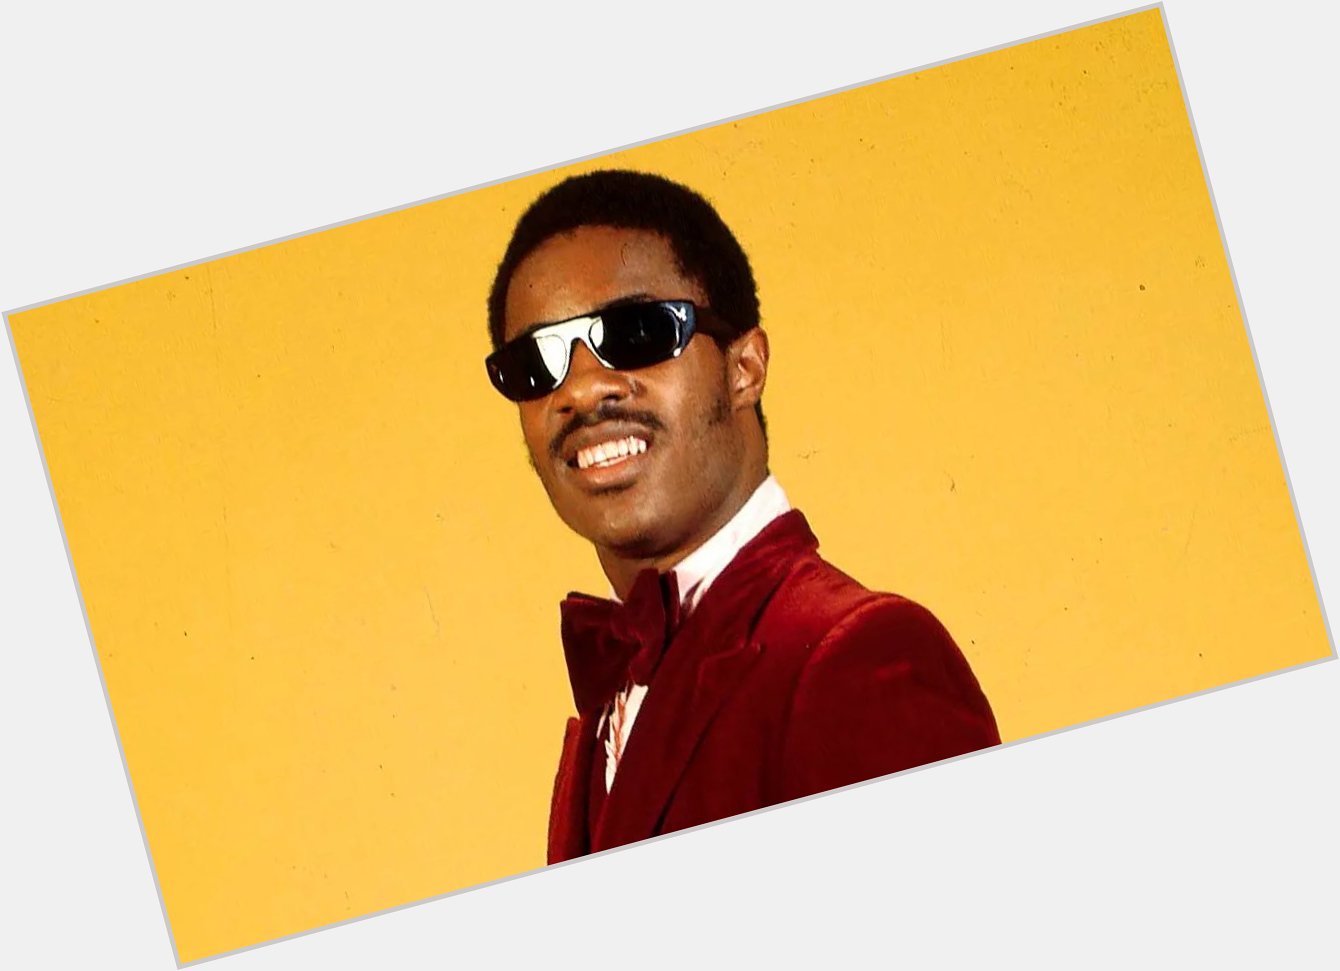  Stevie Wonder

3 Most Played Songs:  All I Do   As   Happy Birthday 